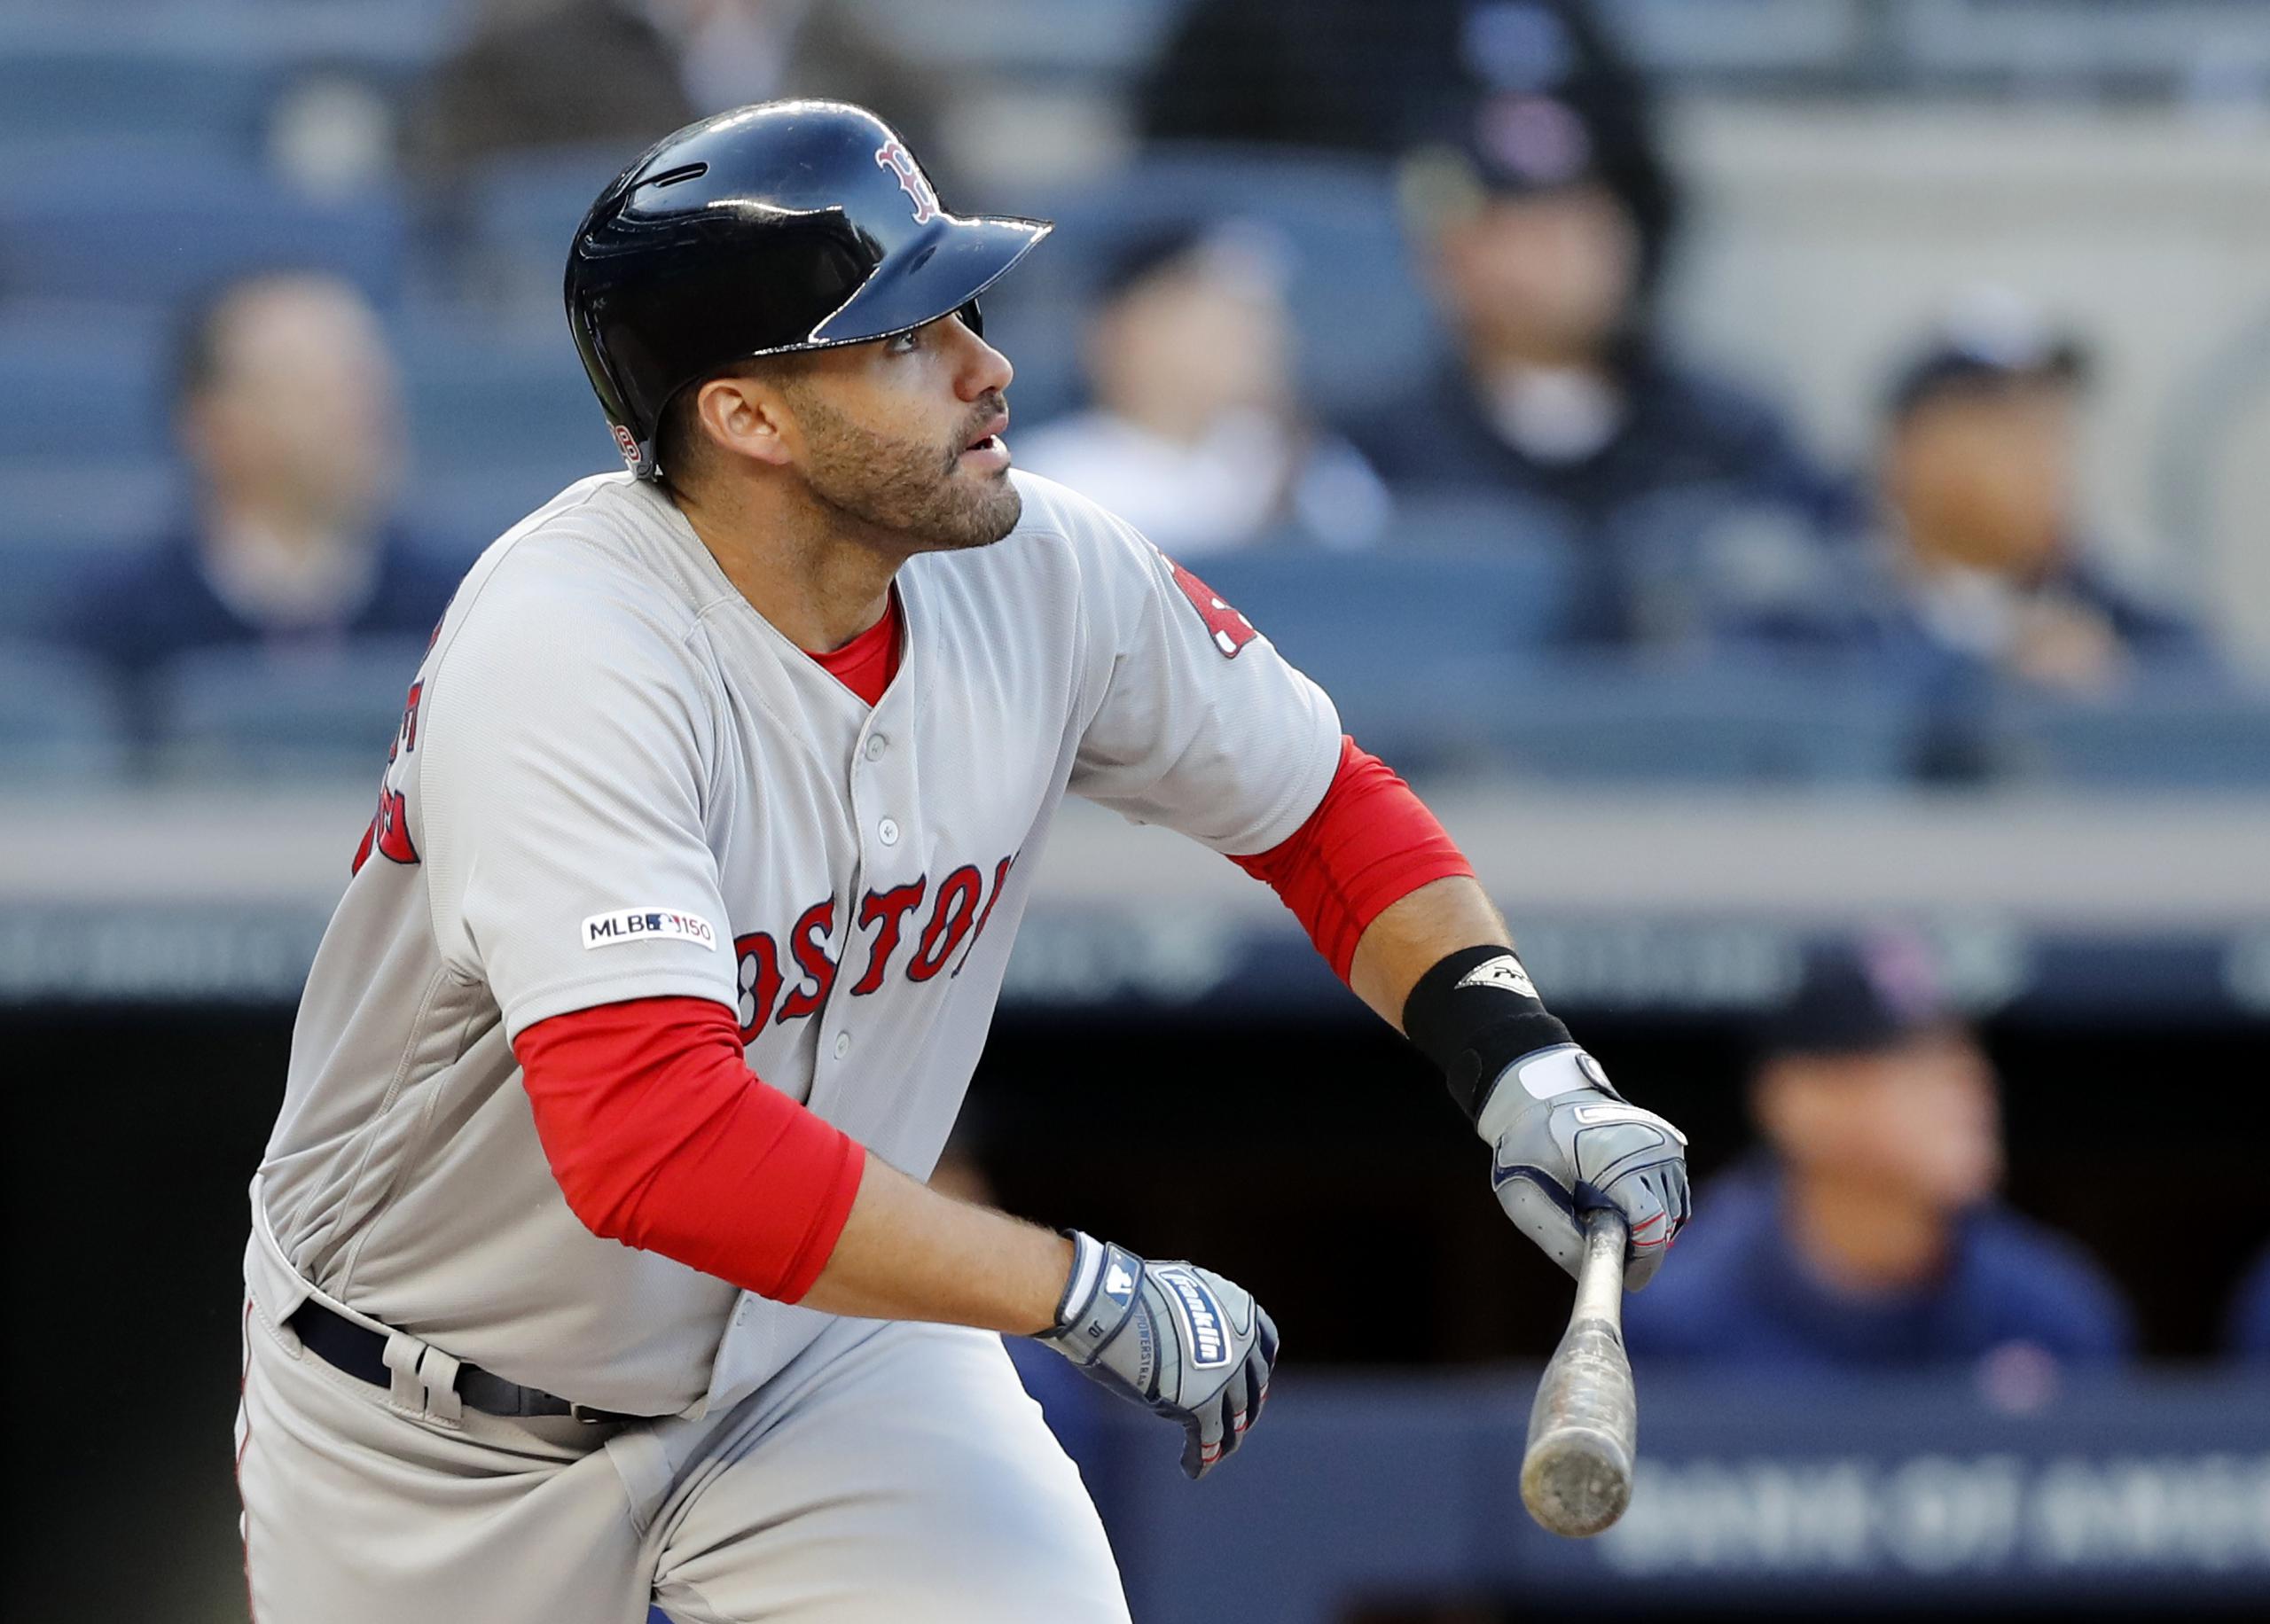 Boston Red Sox's J.D. Martinez watches his first-inning, solo home run off New York Yankees starting pitcher J.A. Happ during the first inning of a baseball game, Wednesday, April 17, 2019, in New York. (AP Photo/Kathy Willens)